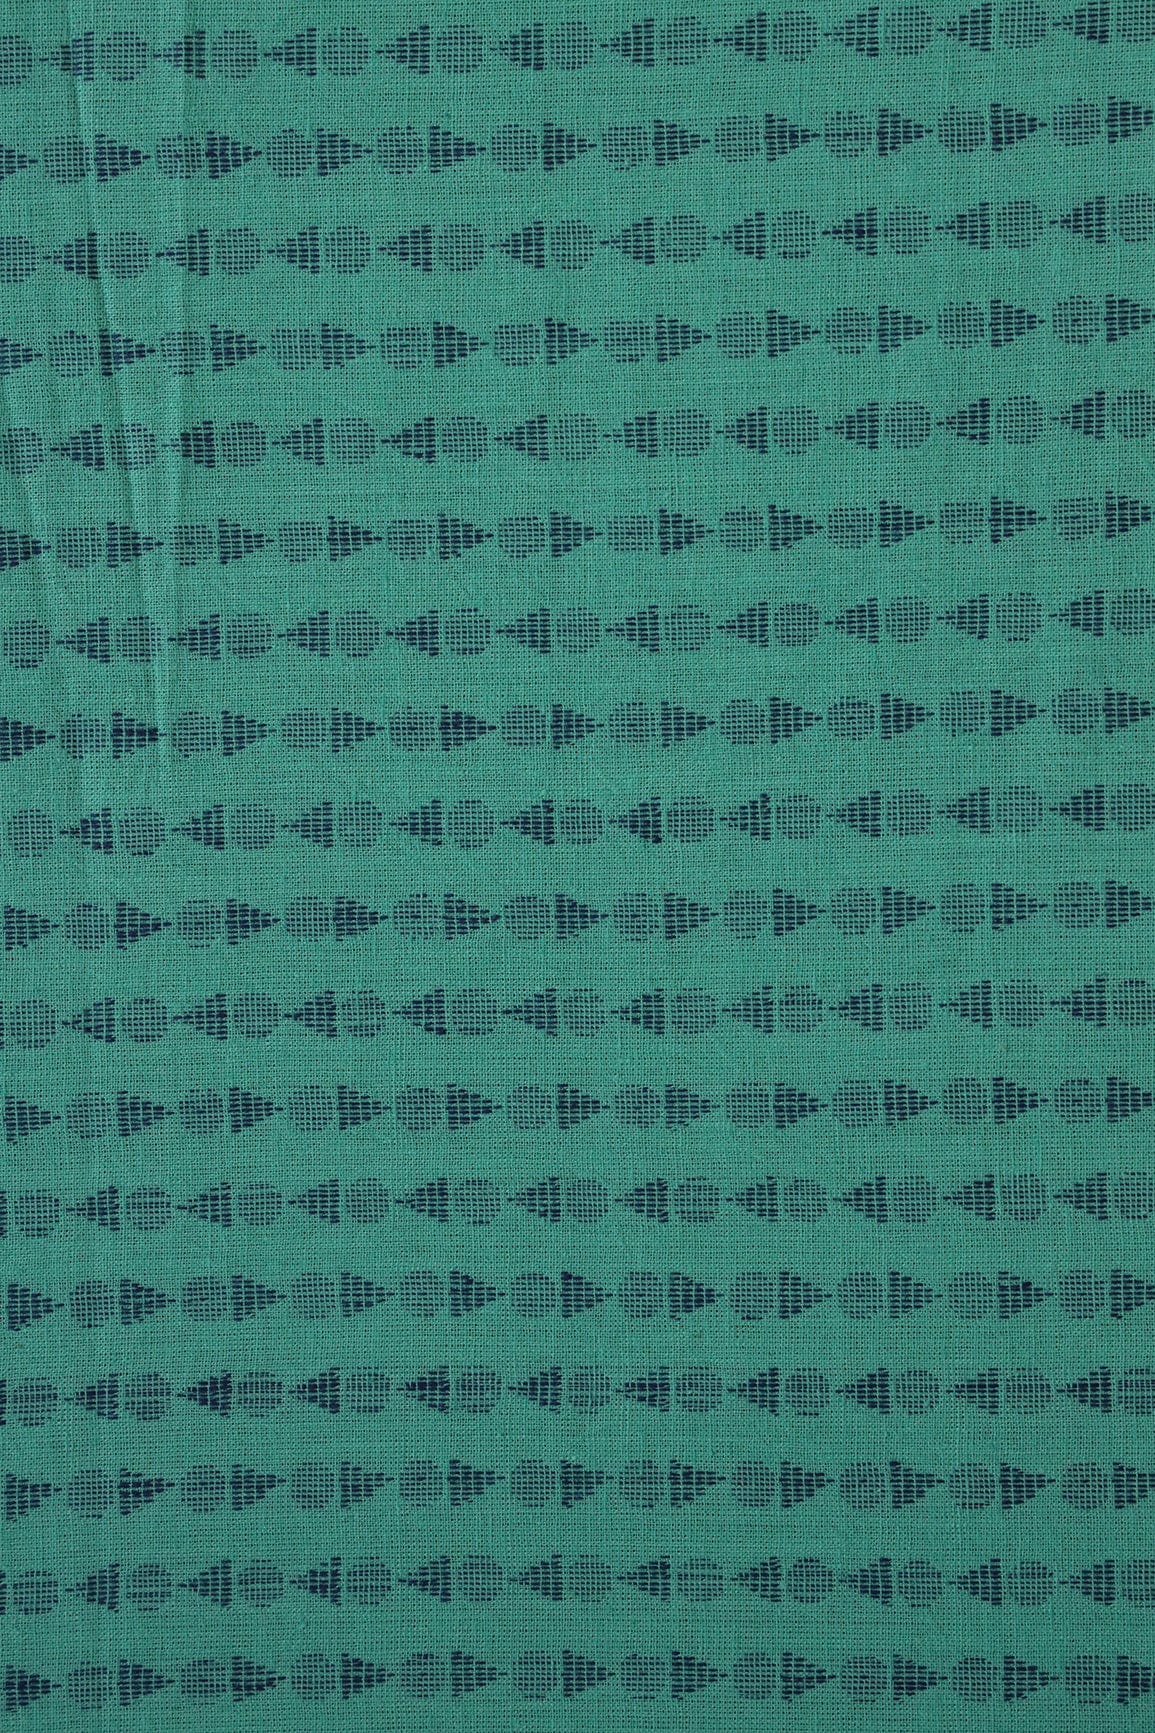 doeraa Hand Woven Teal And Blue Geometric Pattern Handwoven Organic Cotton Fabric